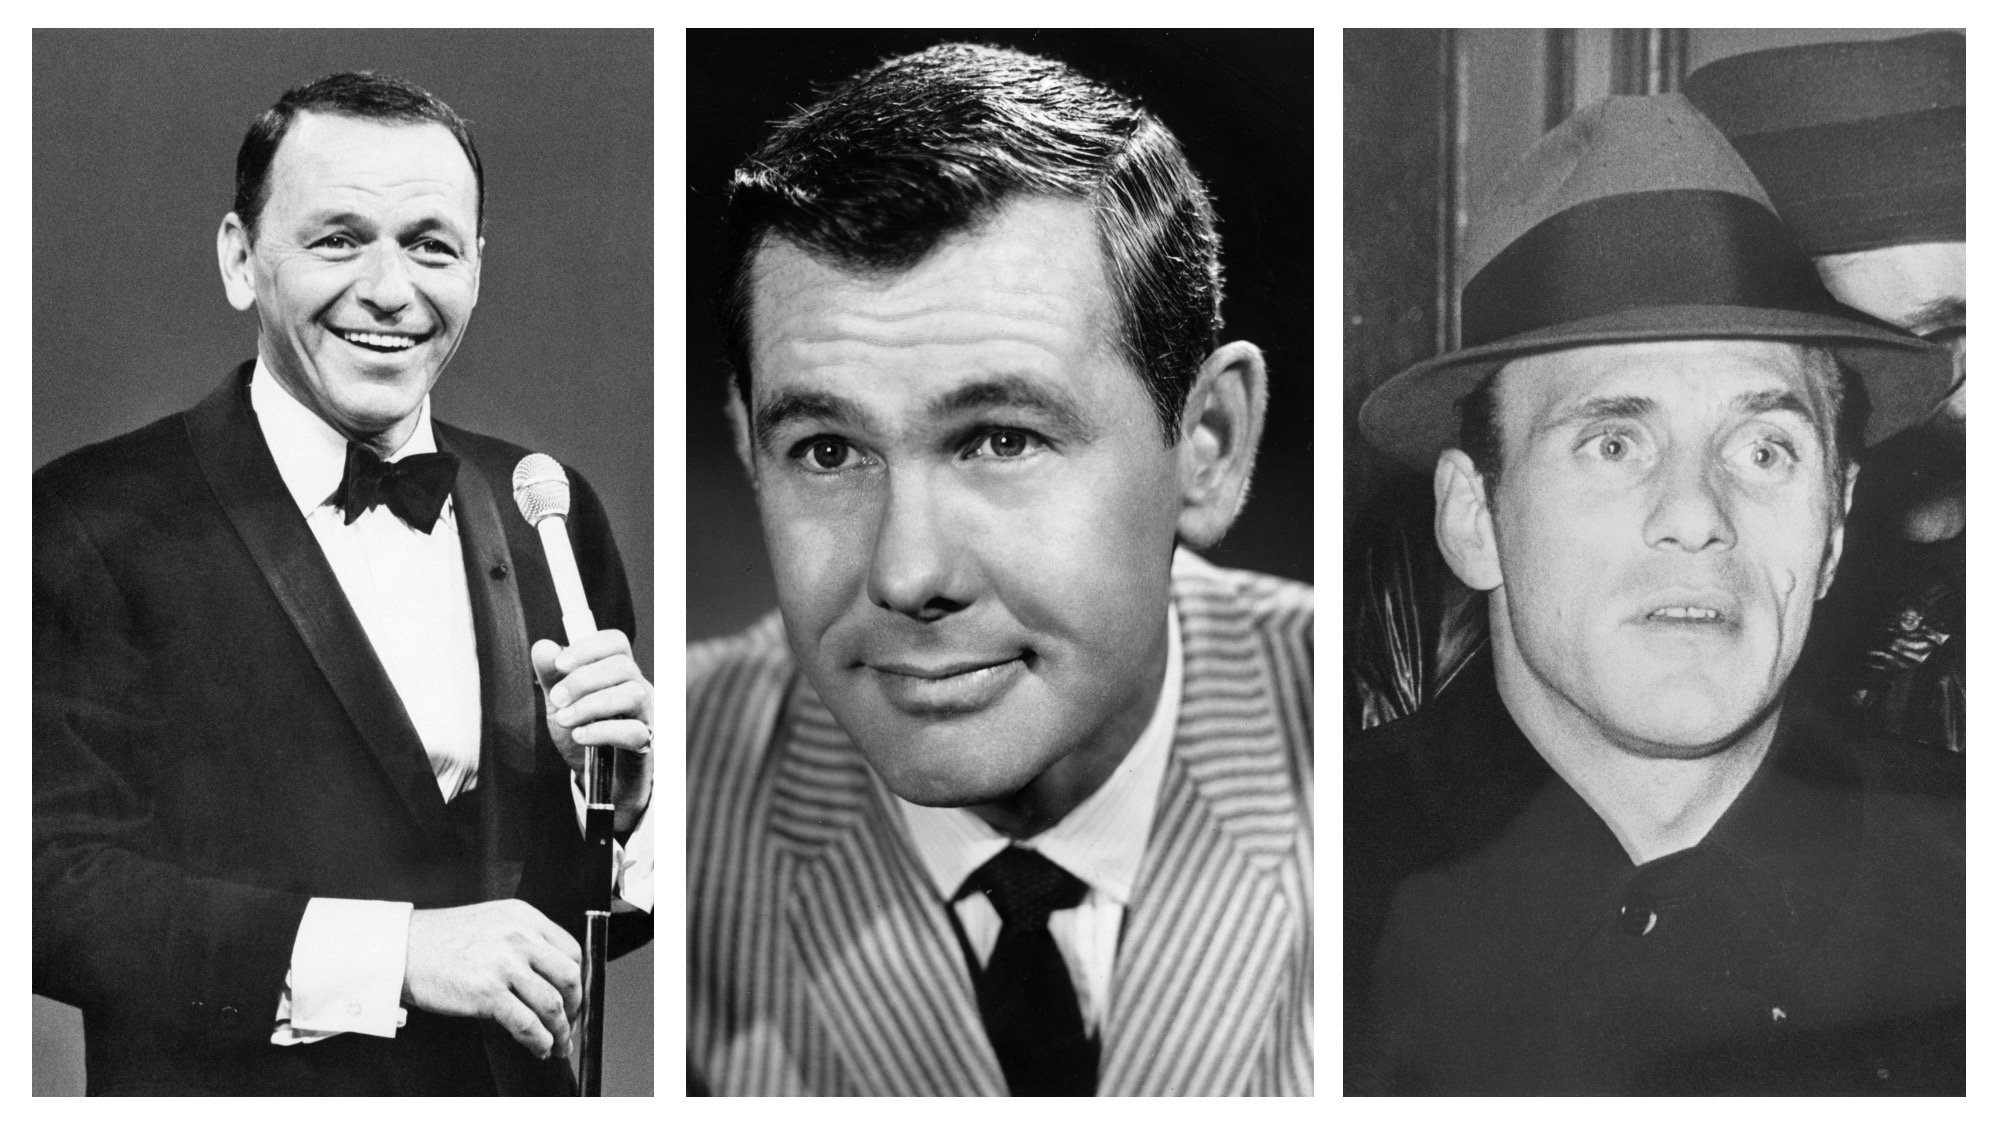 (L) Frank Sinatra performs on his TV special 'Frank Sinatra: A Man and his Music.' (C) Promotional headshot portrait of American comedian and talk show host Johnny Carson, for the talk show 'The Tonight Show' c. 1962. (R) Reputed mobster Joseph "Crazy Joe" Gallo c. 1961.